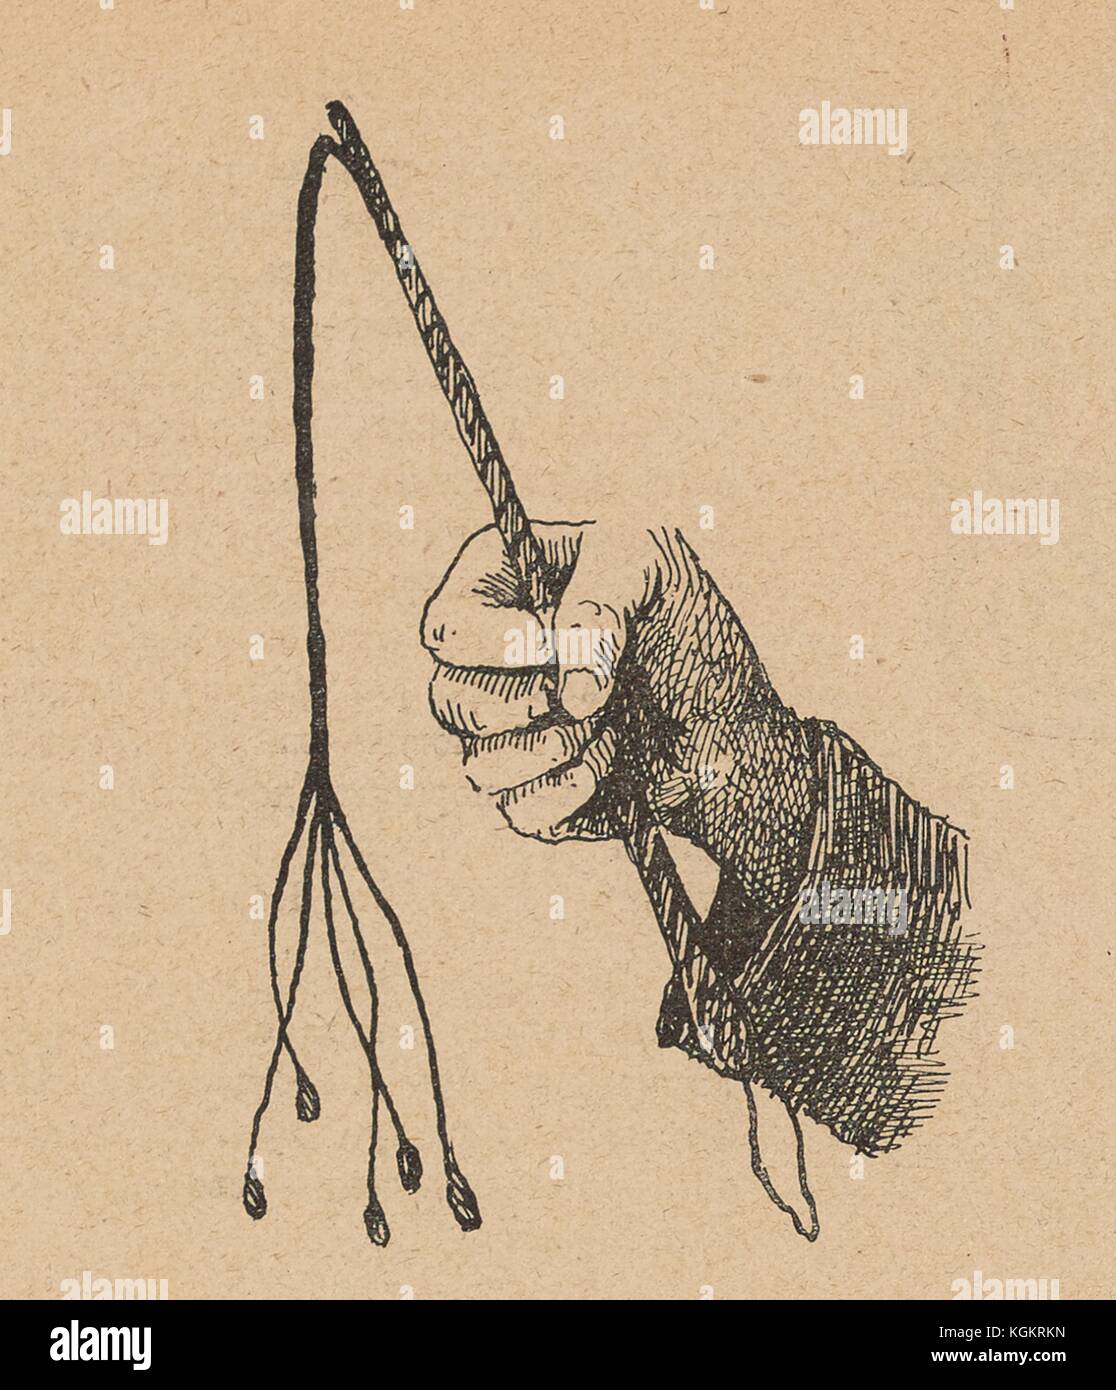 Illustration from the Russian satirical journal Ovod (Gadfly) depicting a hand holding a whip with five lashes, a modified version of the cat-o'-nine-tails, 1906. Stock Photo